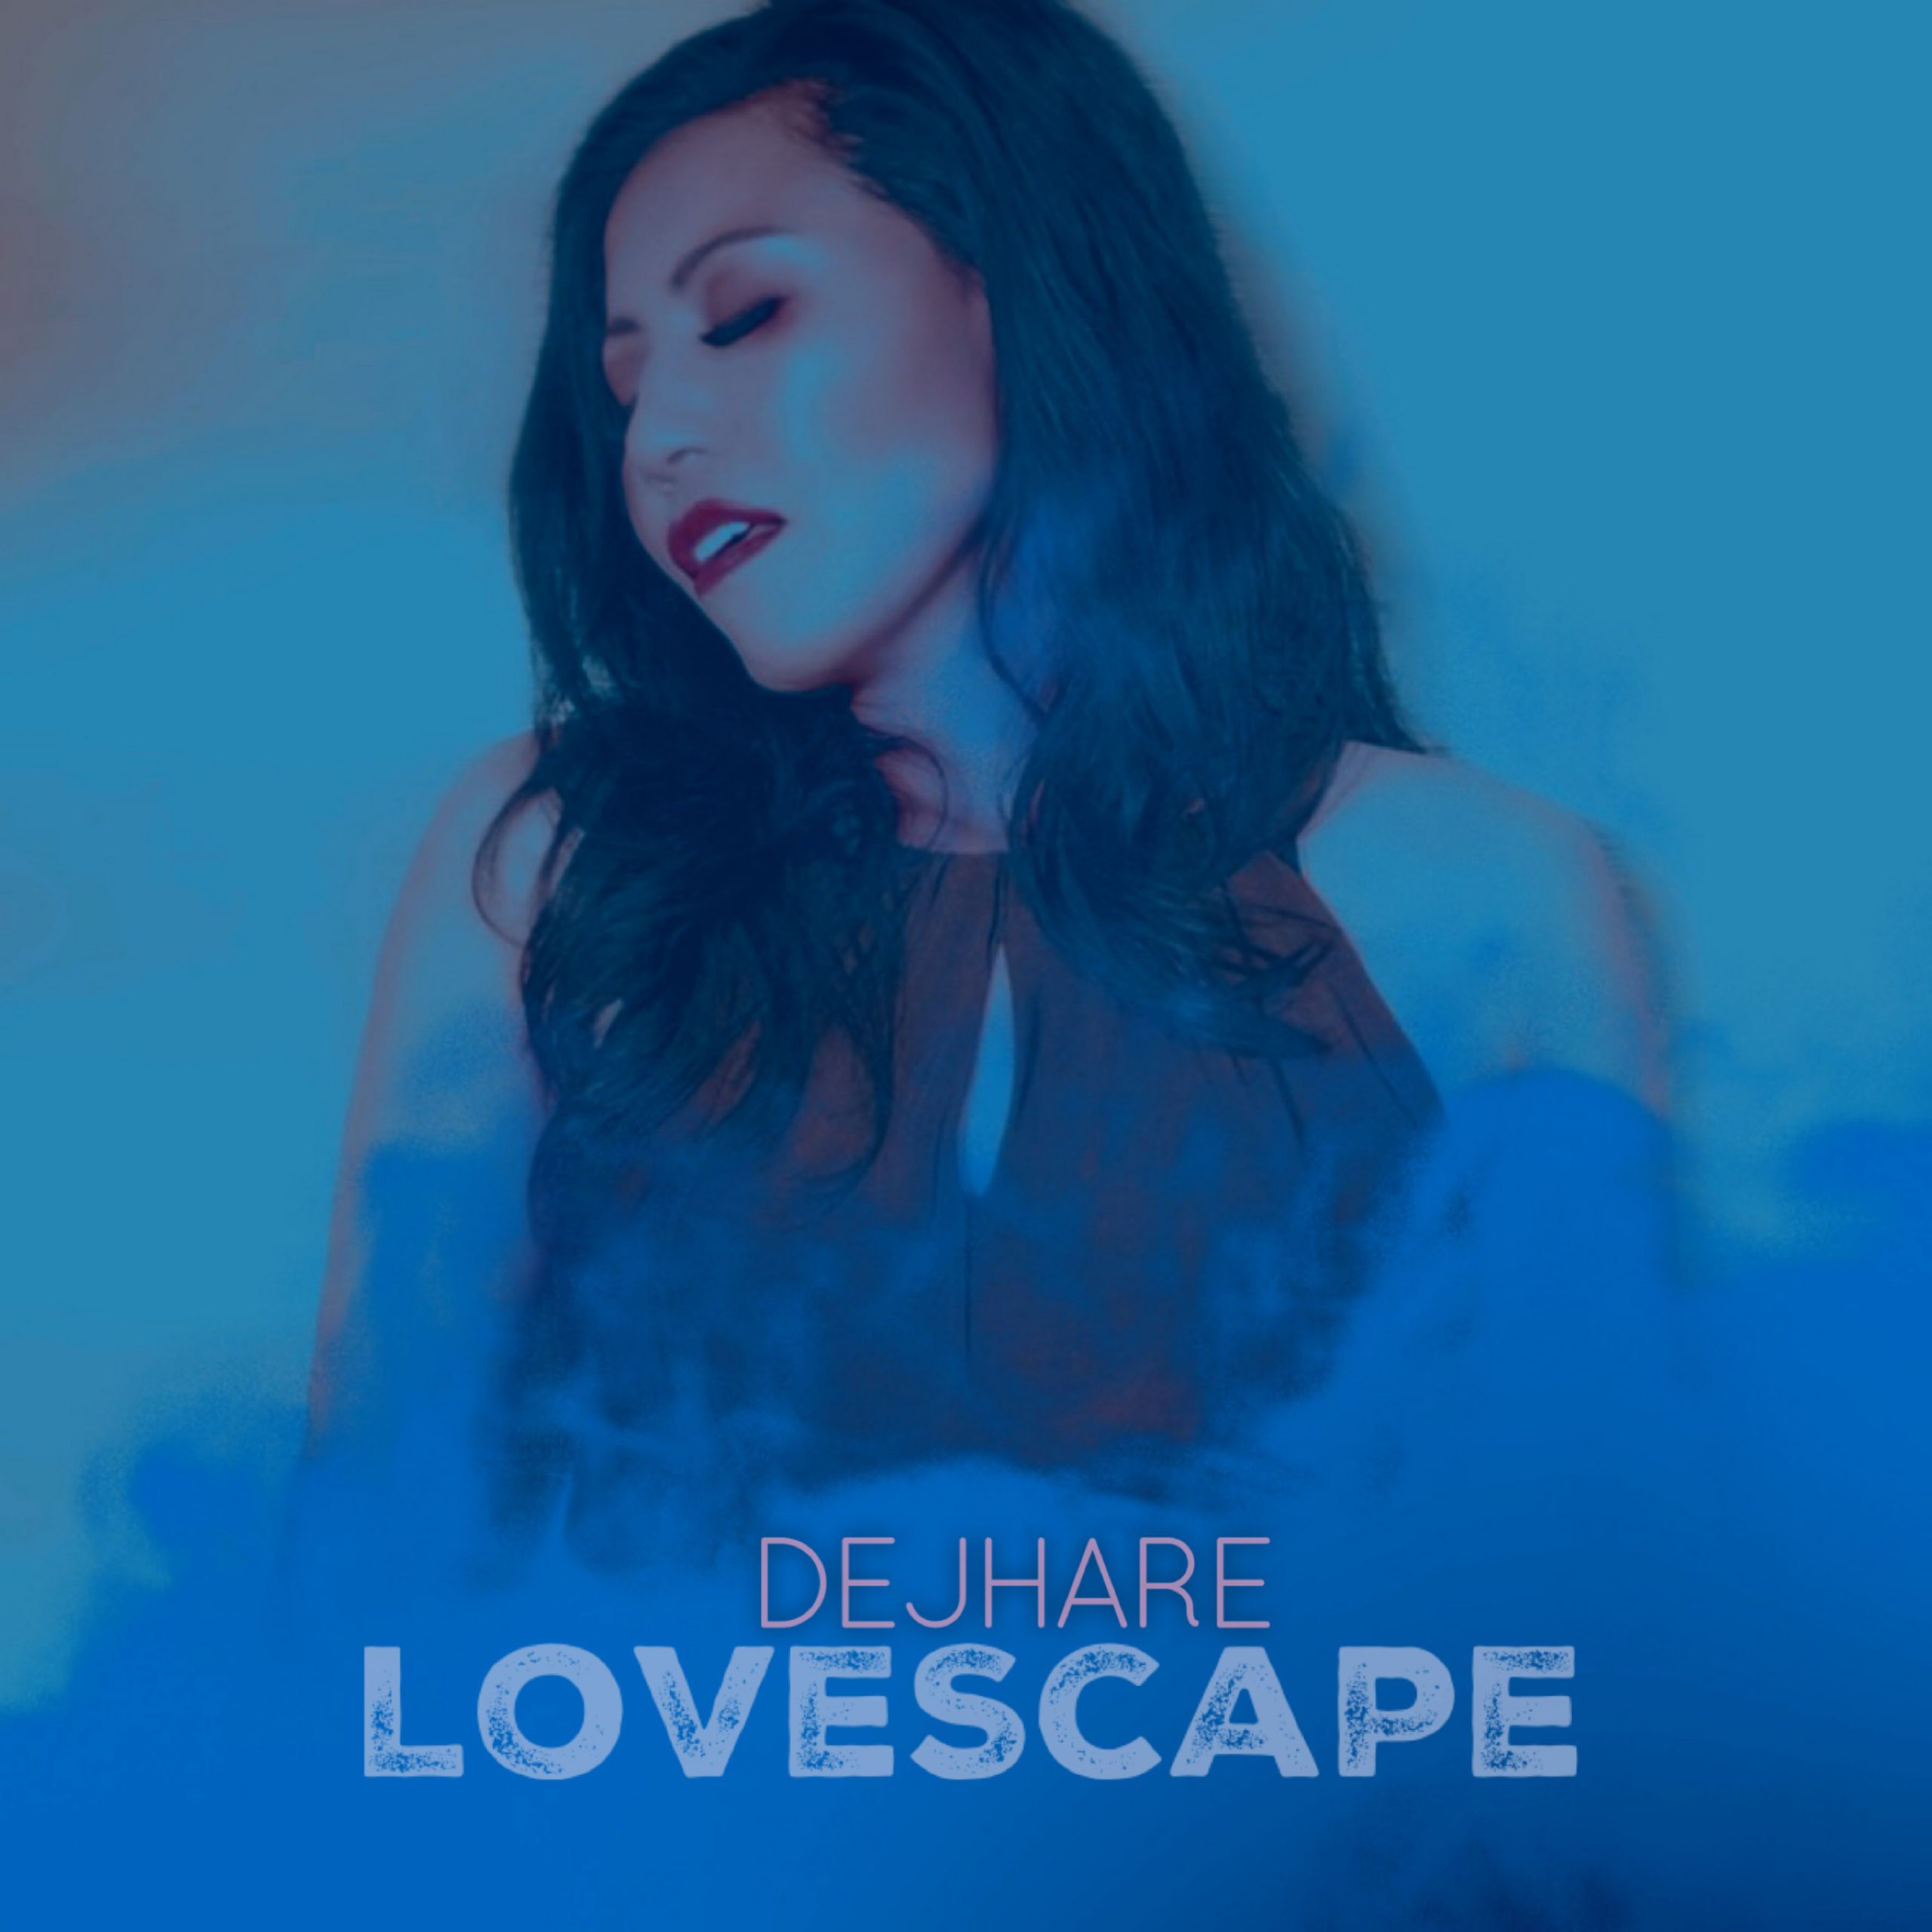 Singer-songwriter ‘Dejhare’ drops a cheerful and uplifting E.P entitled ‘Lovescape’ that pulses with pop-dance enthusiasm and positivity.